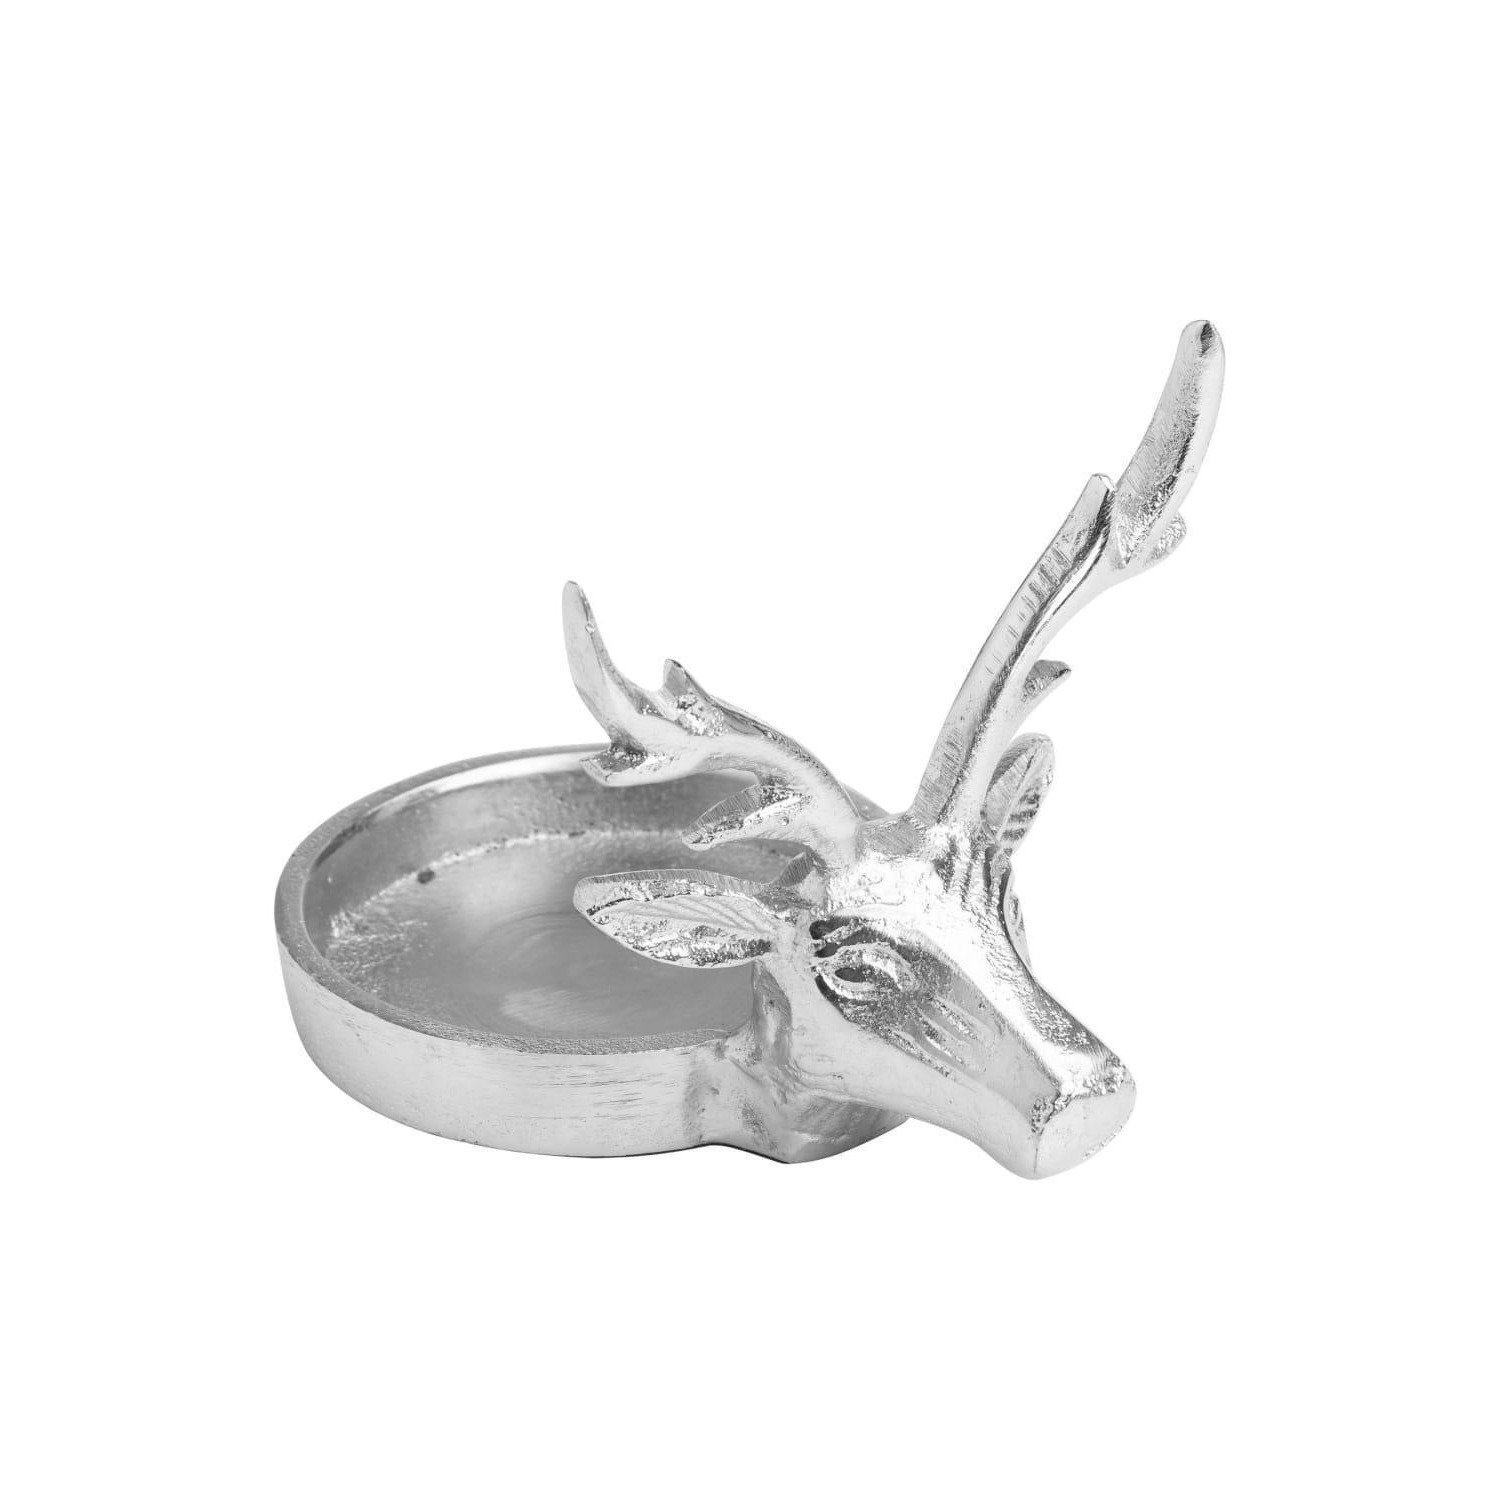 Farrah Collection Stag Candle Holder - image 1